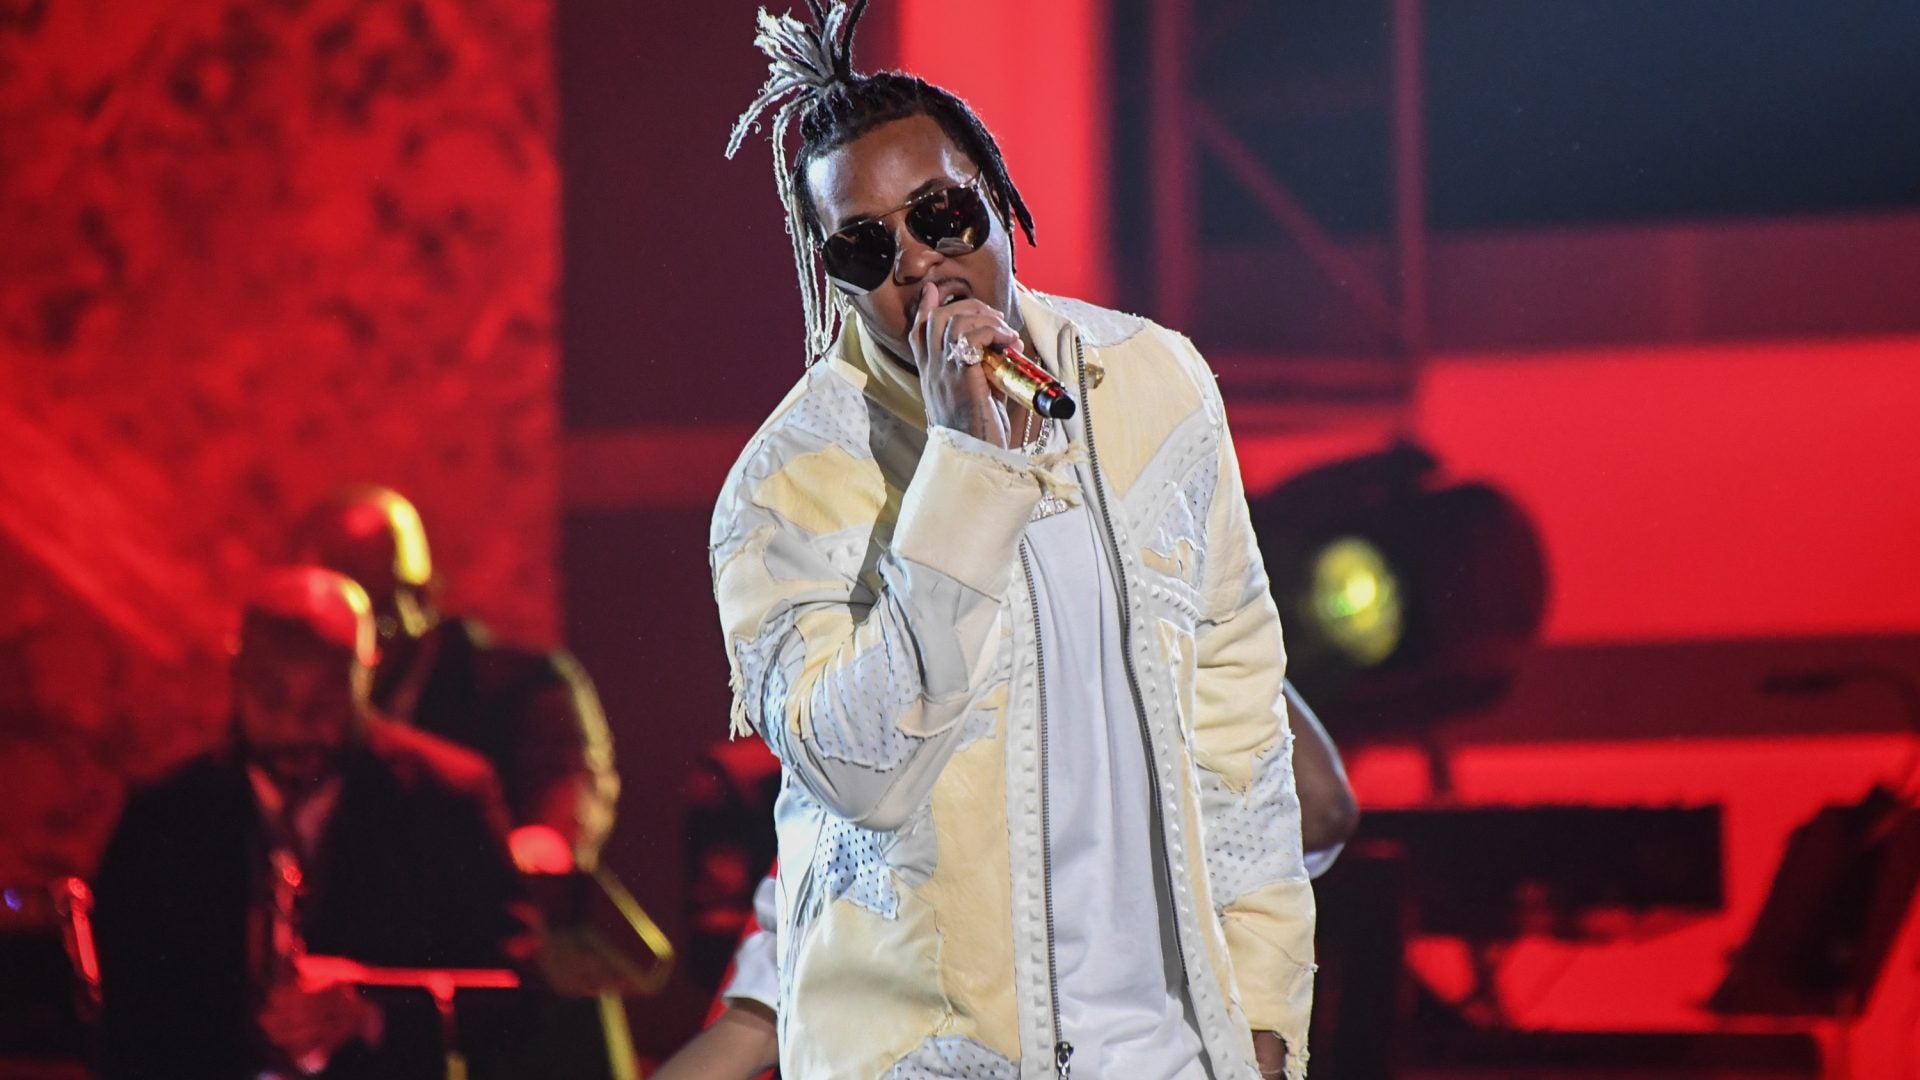 Jeremih Is Out Of The Hospital Following Bout With COVID-19: "Thank God I'm Still Here"